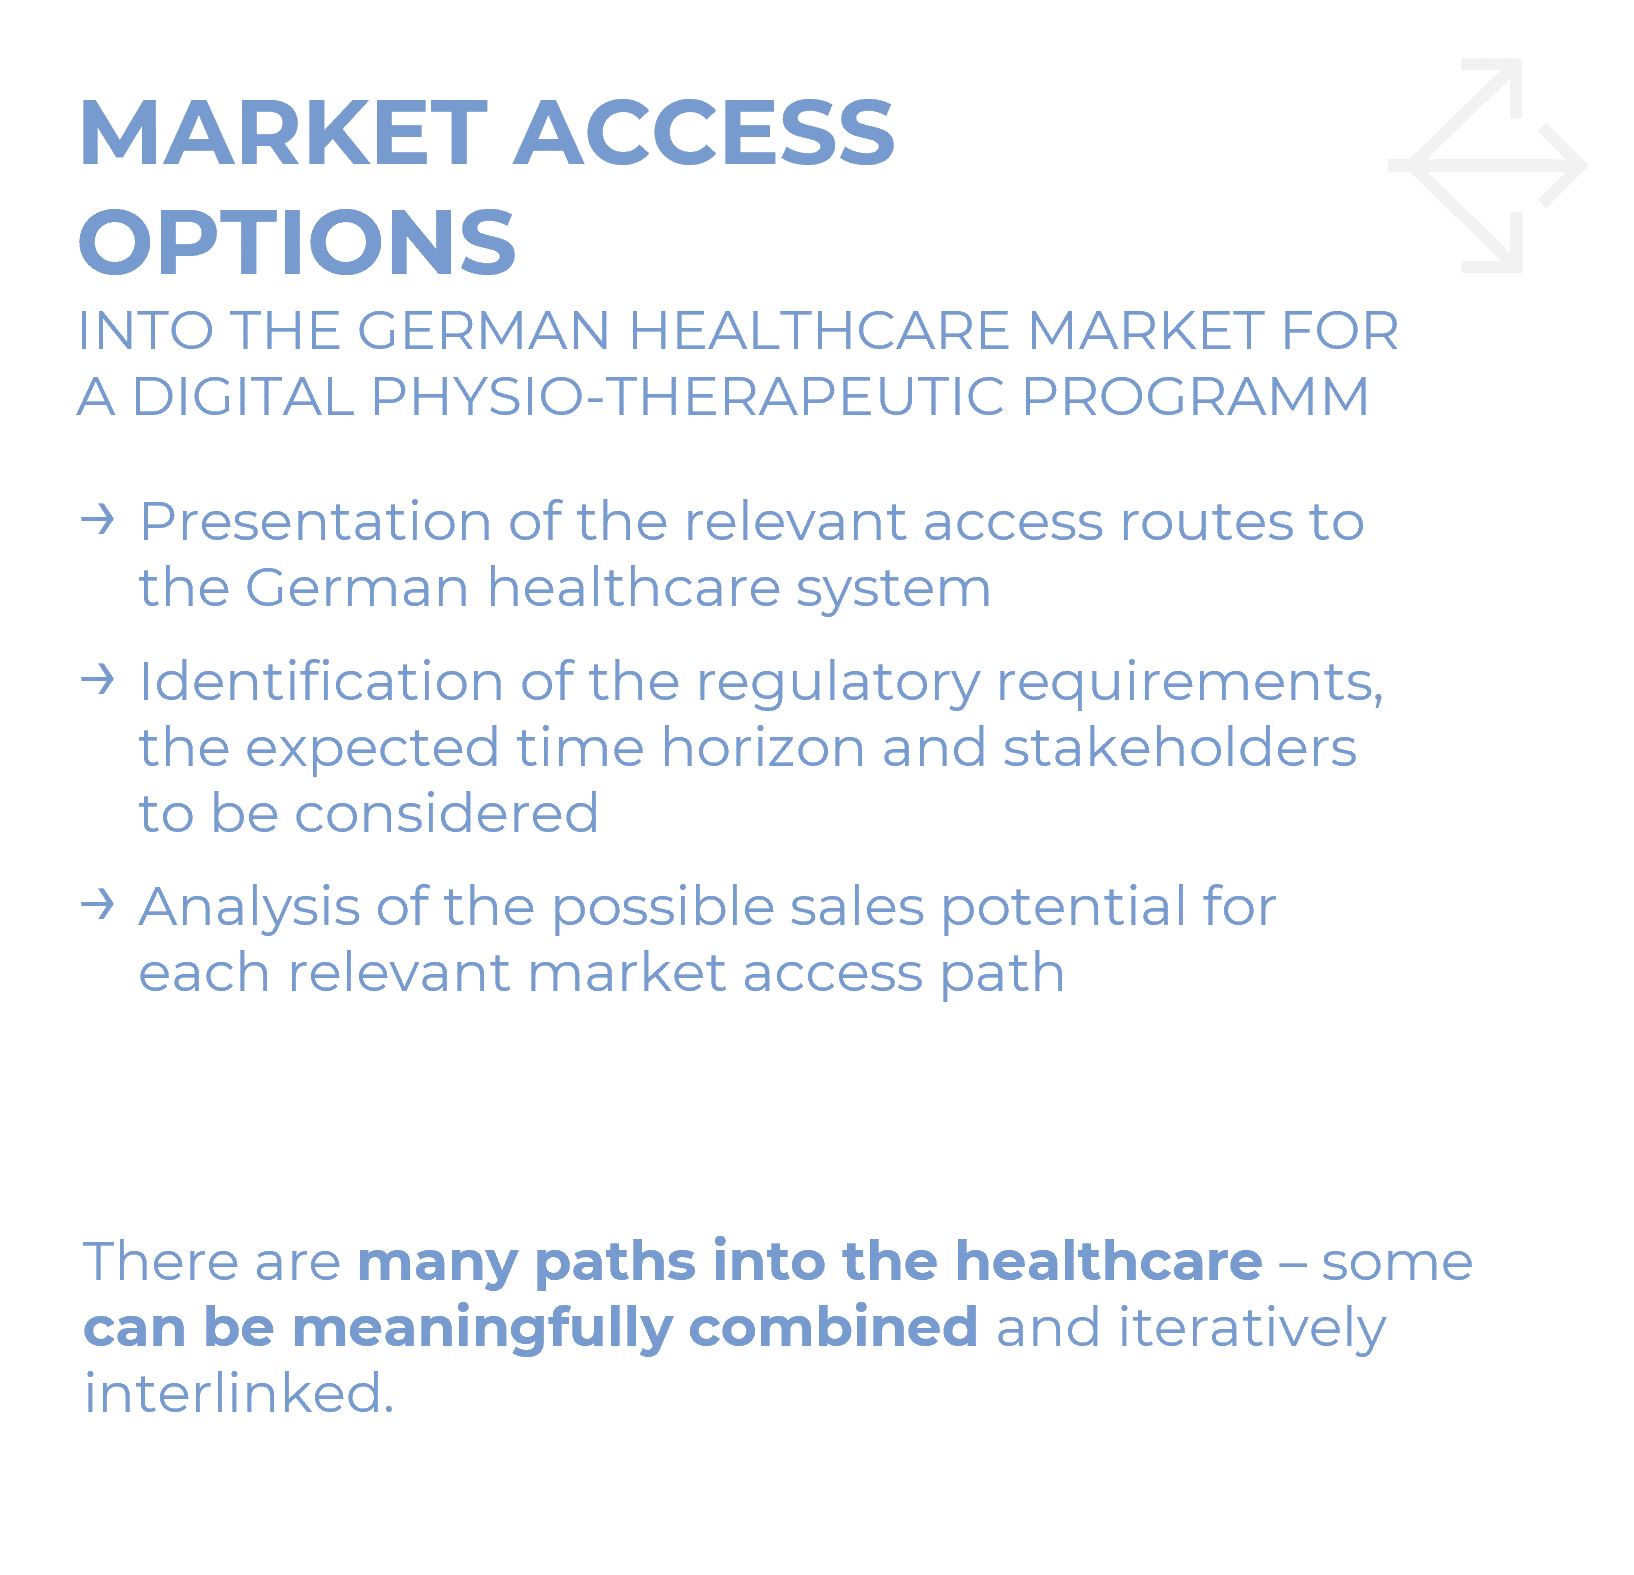 MARKET ACCESS OPTIONS INTO THE GERMAN HEALTHCARE MARKET FOR A DIGITAL PHYSIO-THERAPEUTIC PROGRAMM